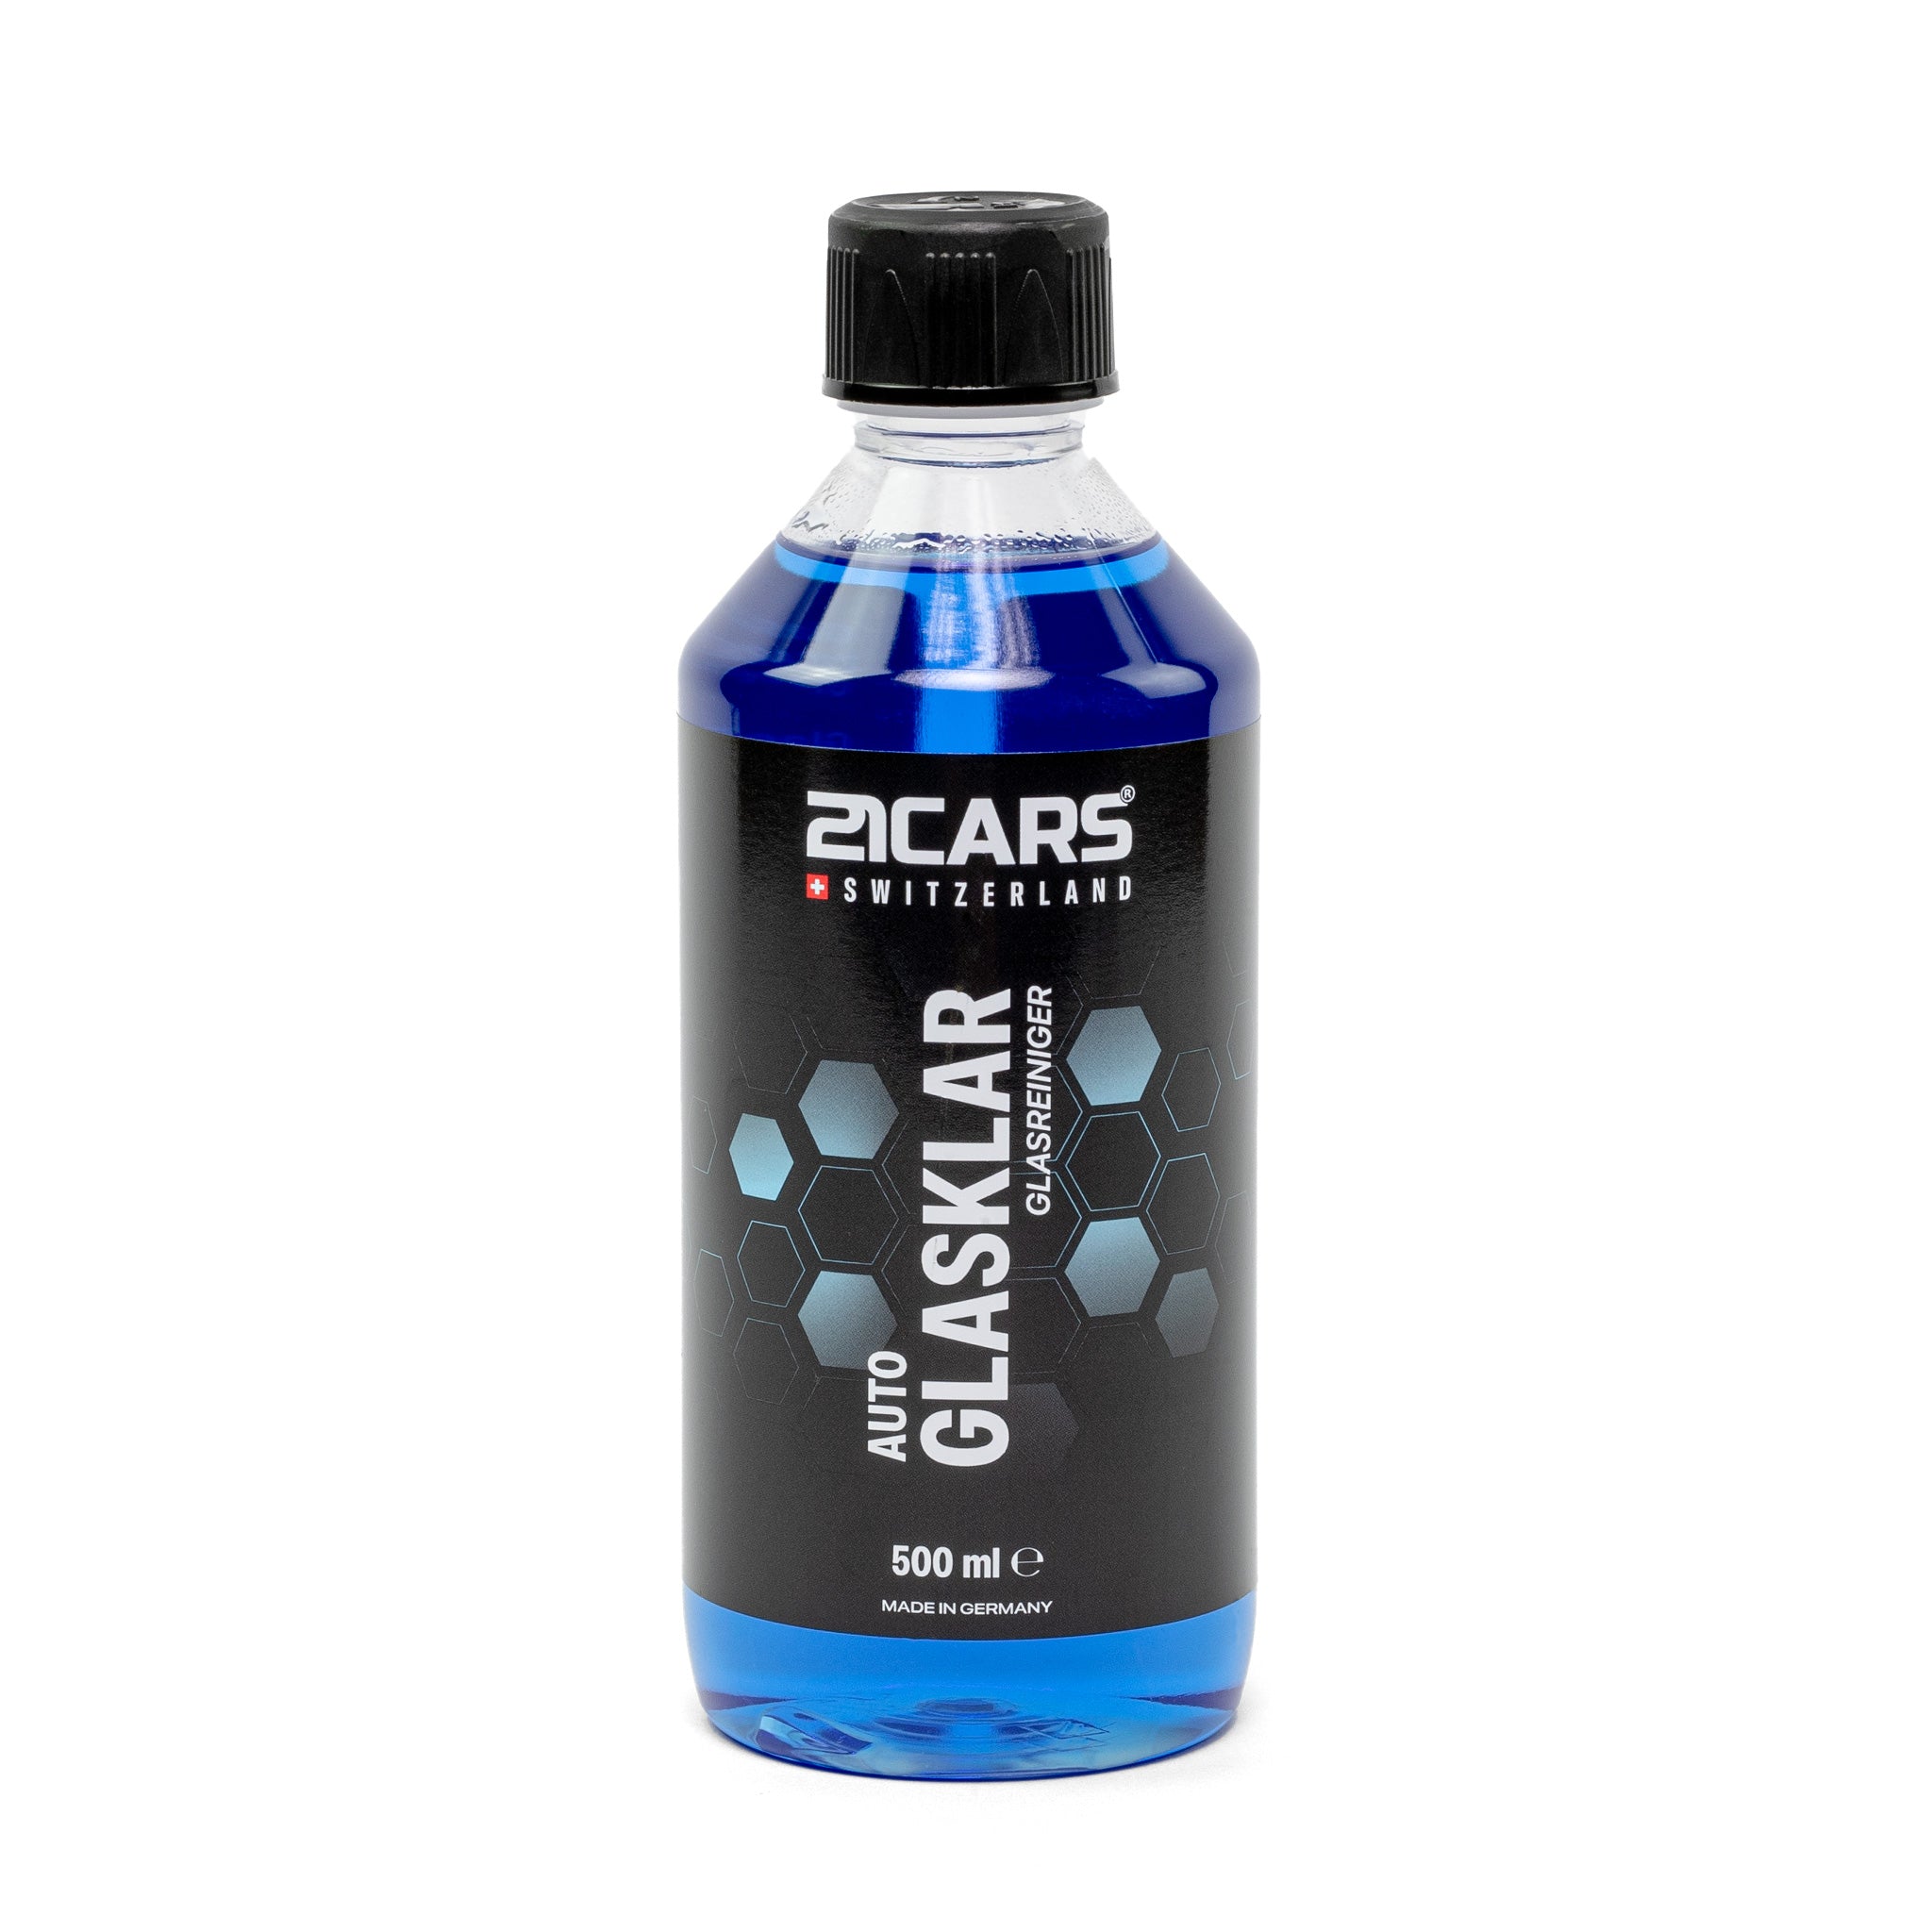 21CARS® Glass Cleaner crystal clear | 0.5 liters